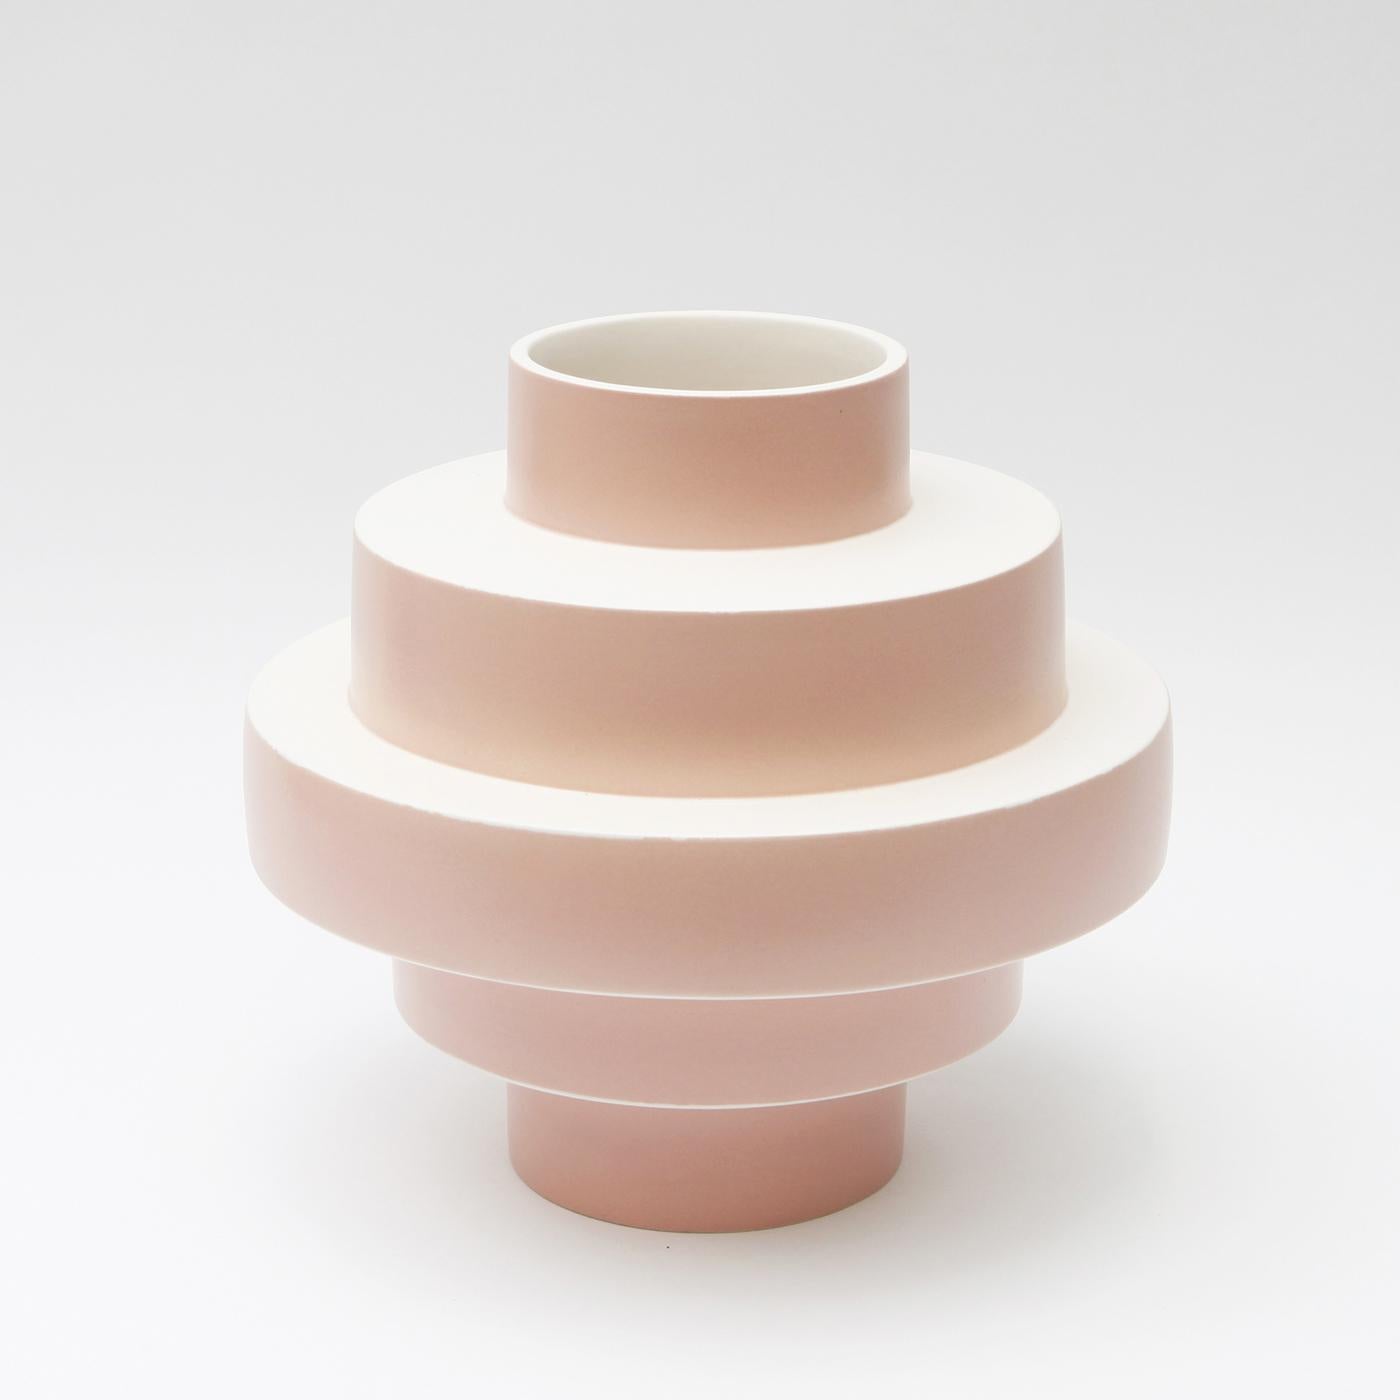 Show off your favorite flowers in style and enhance the look of your contemporary decor with the elegant and dynamic Monté vase in soft pink ceramic. Entirely hand crafted, this delightful accessory features a clever shape of layers of concentric